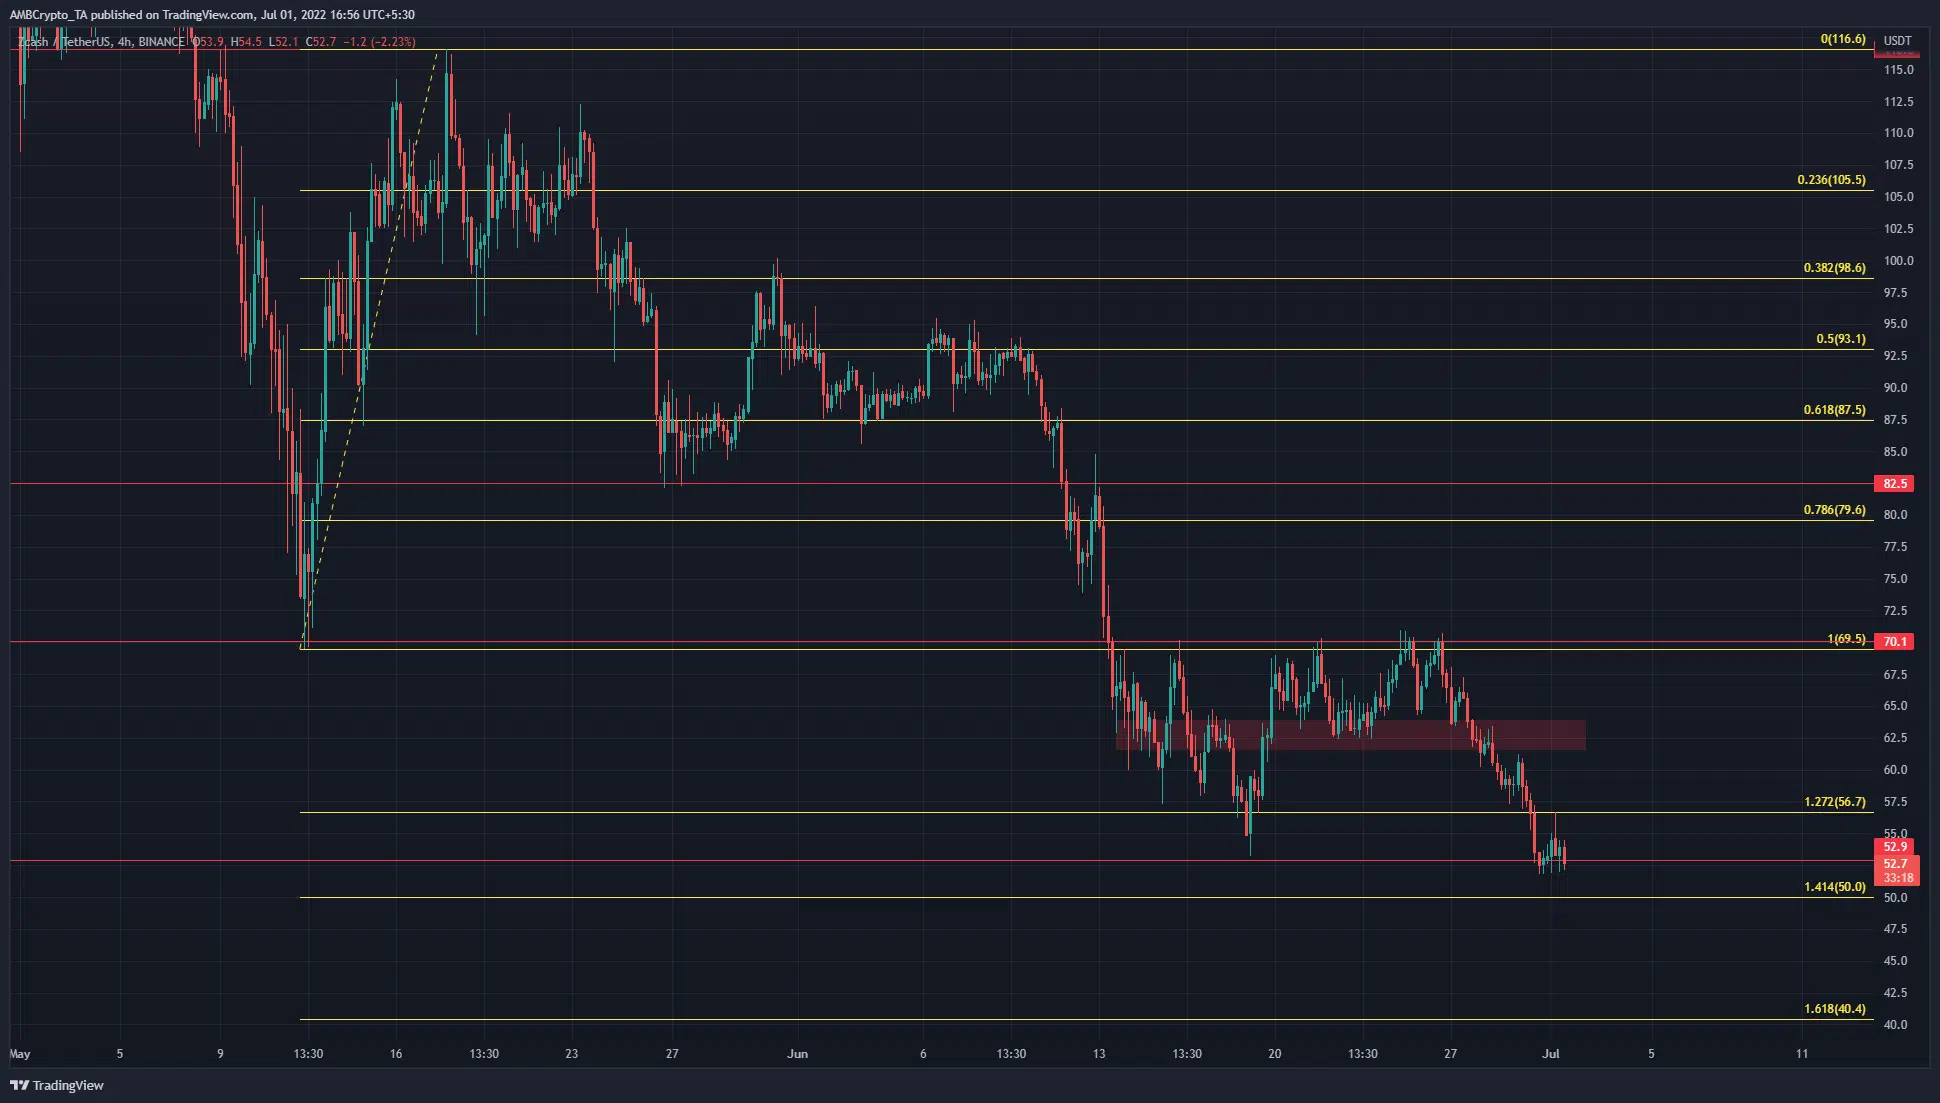 ZCash retests $56 as resistance- here are some Fib extension levels that could serve as support